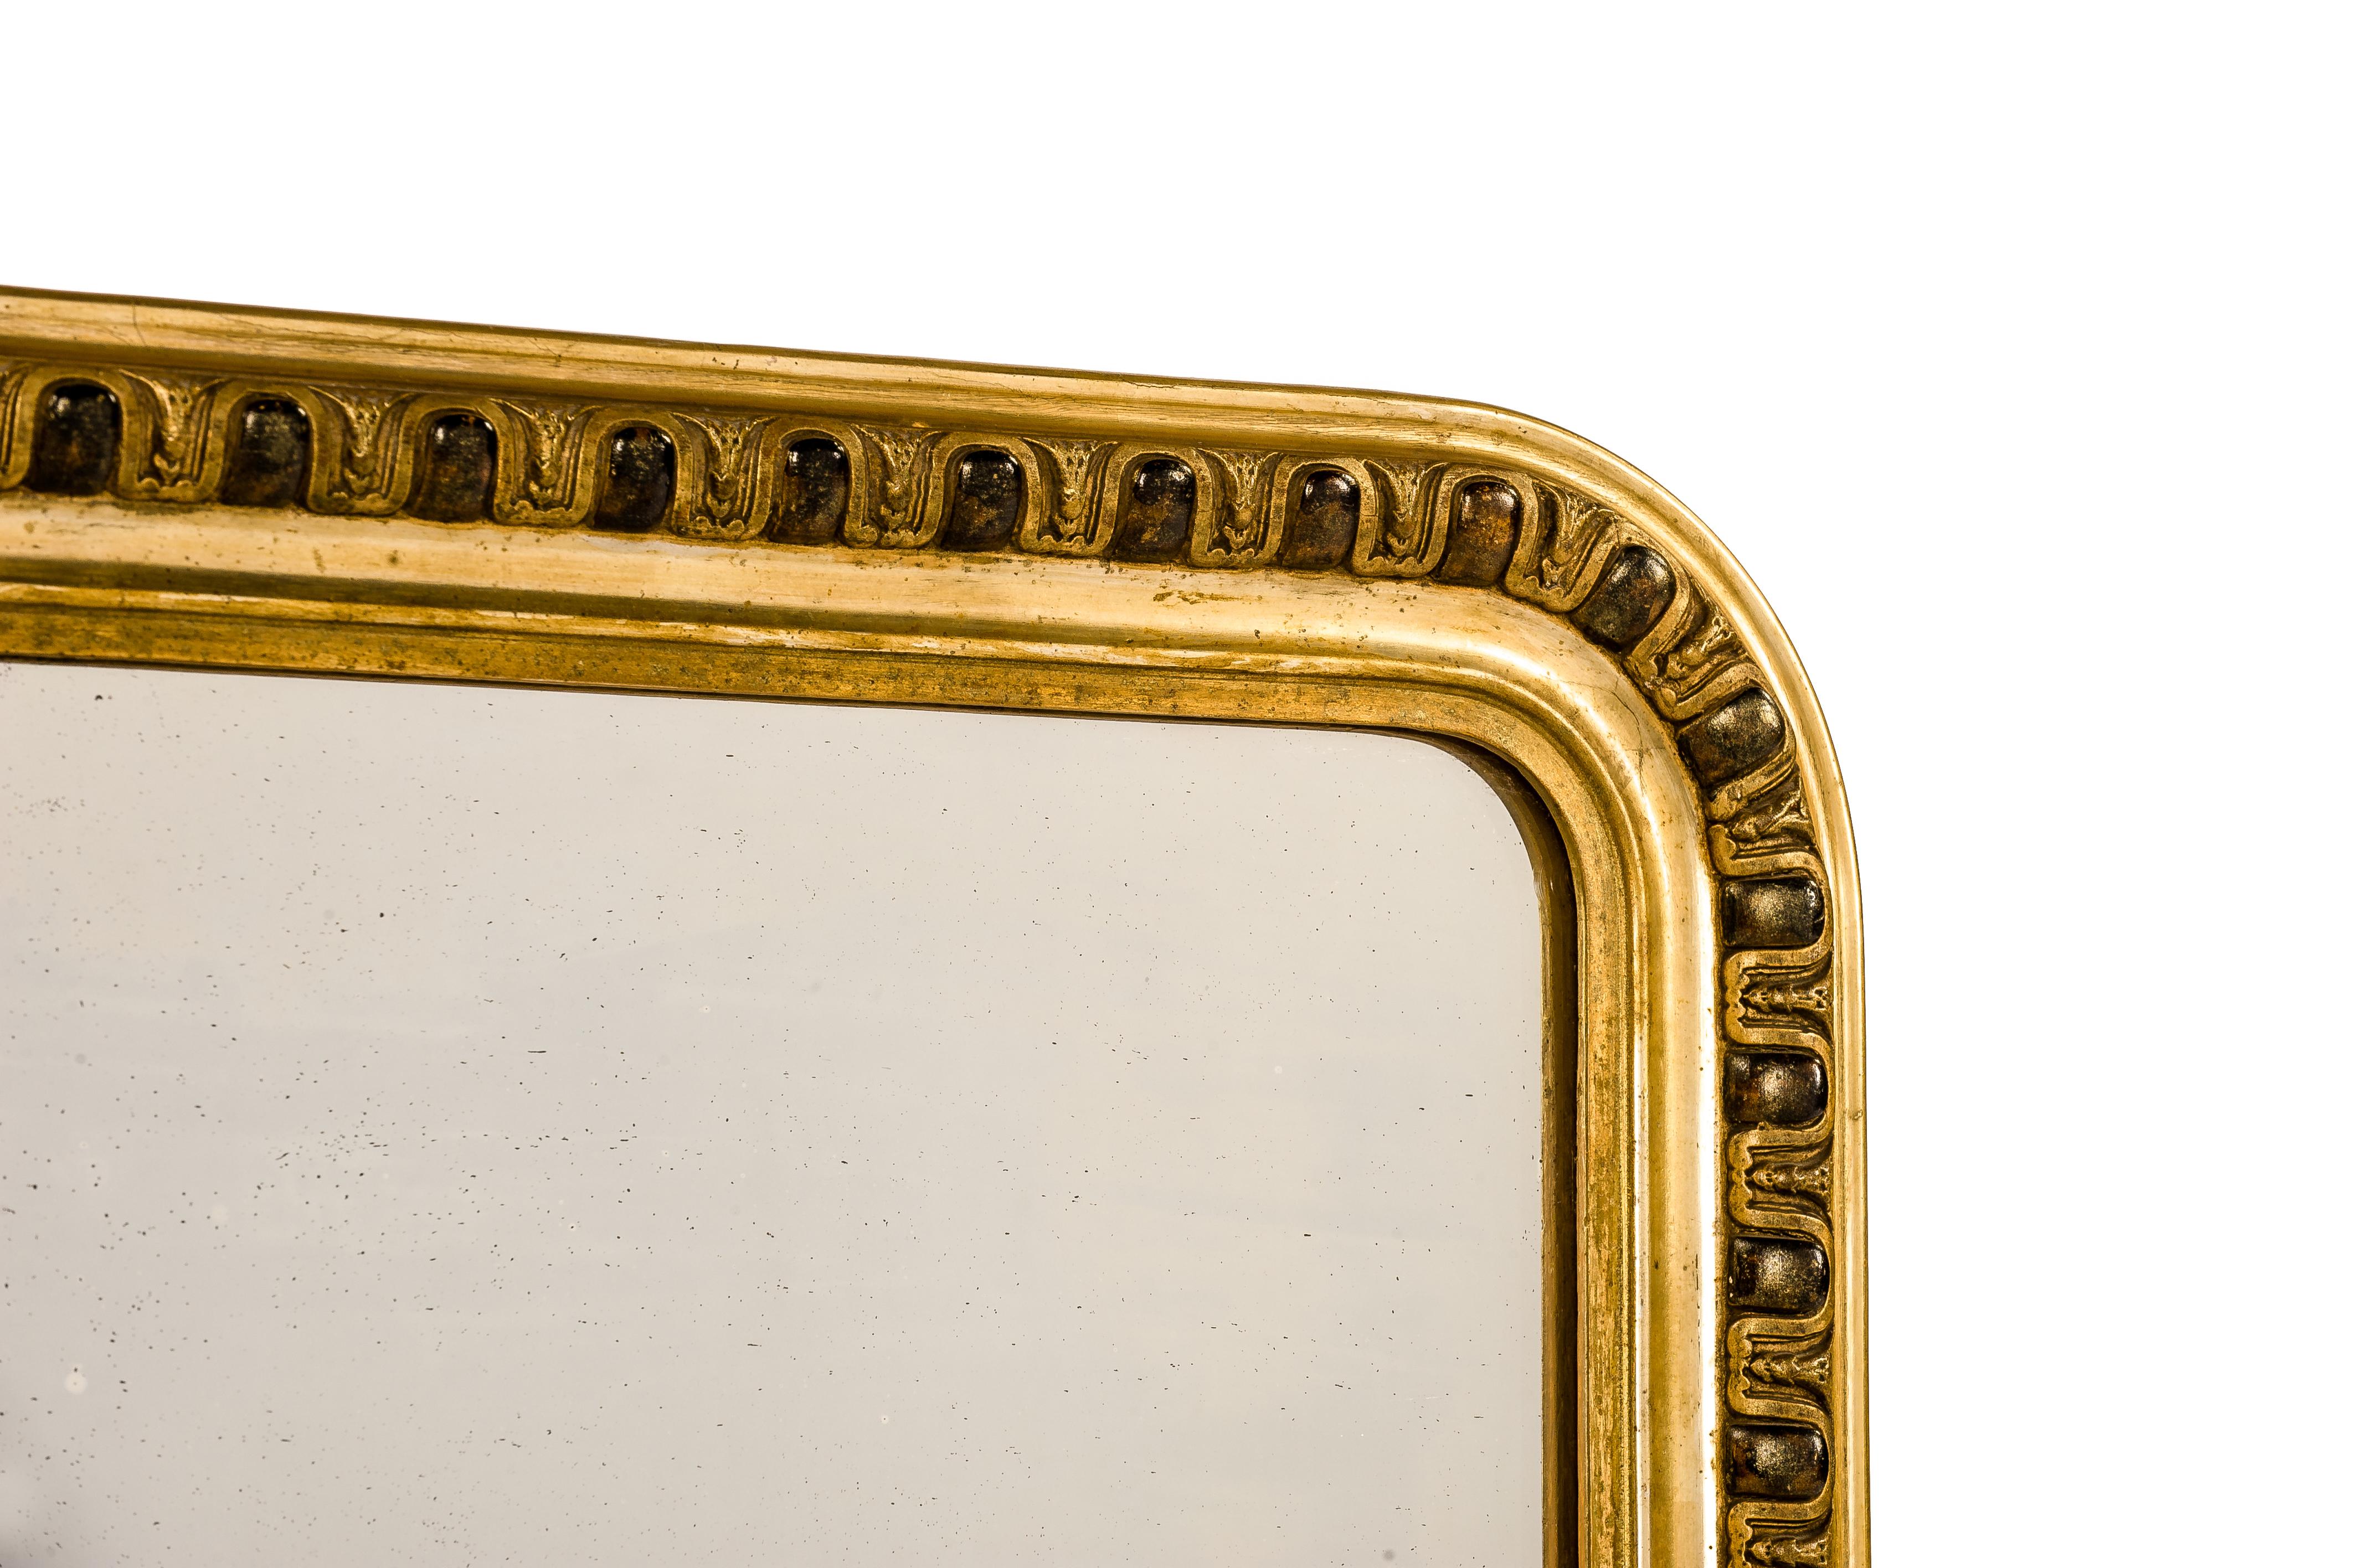 This beautiful antique mirror was made in France around 1880. The mirror has the upper rounded corners typical for a Louis Philippe mirror. The silver nitrate silvered mirror plate is original to the piece. The plate shows many small speckles that